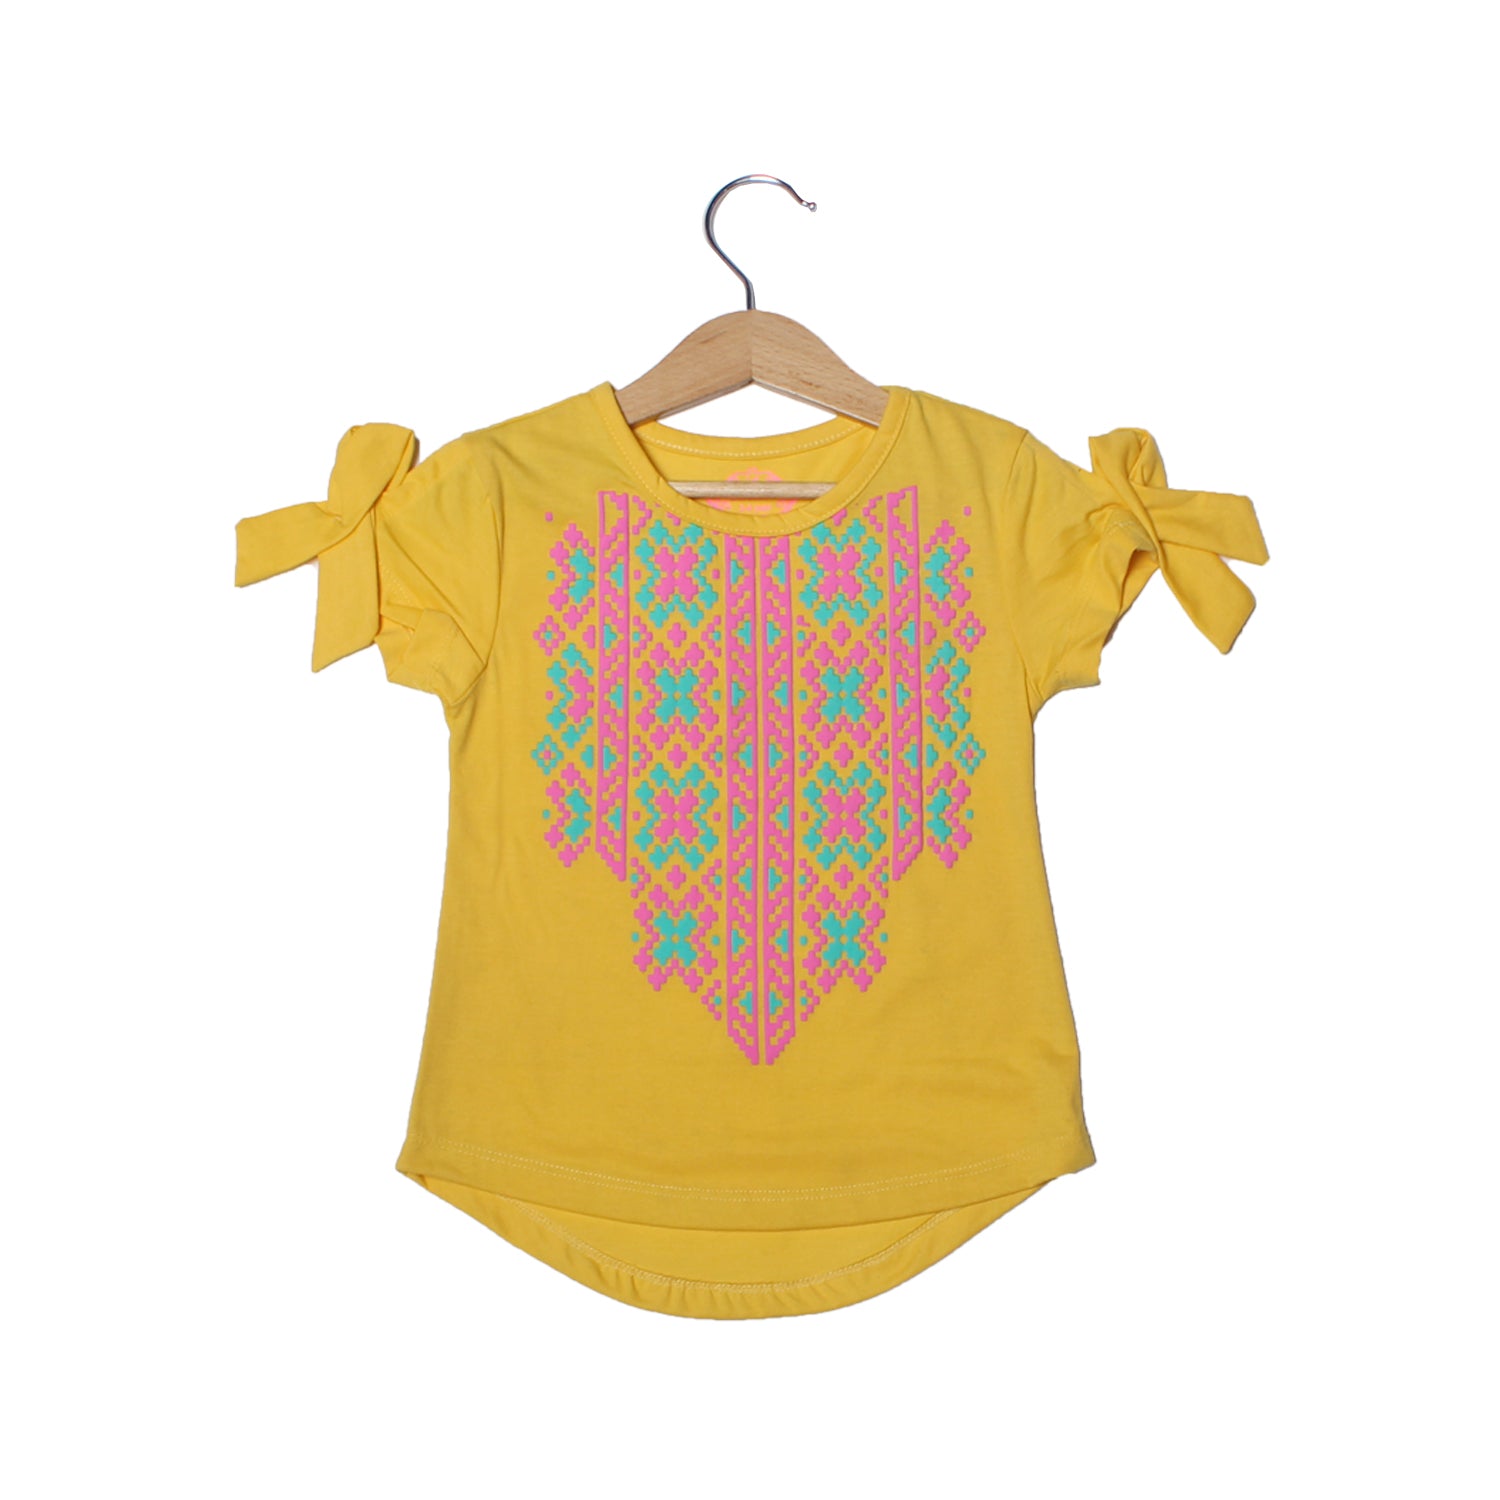 NEW YELLOW DESIGN PATTERN PRINTED T-SHIRT TOP FOR GIRLS